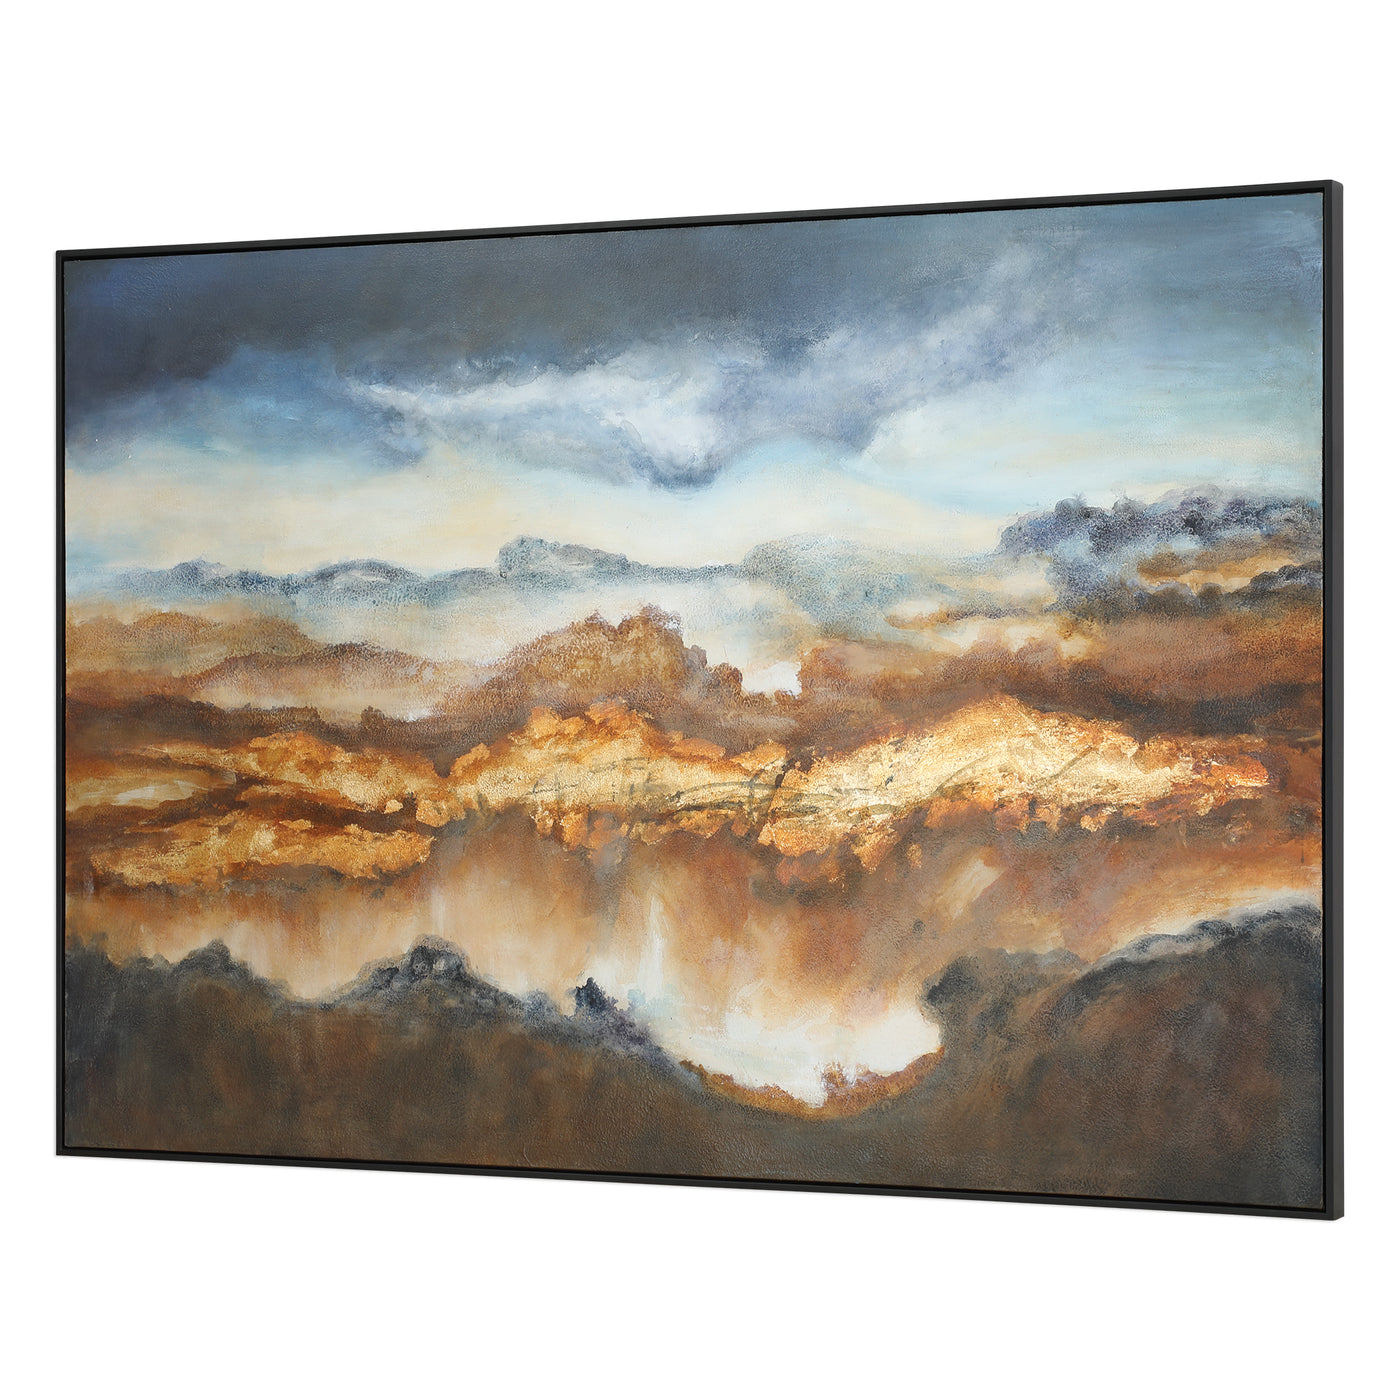 Rich Earth Tone Colors Combined With Brilliant Blue Shades Are Used To Create This Hand Painted Landscape On Canvas. This ...